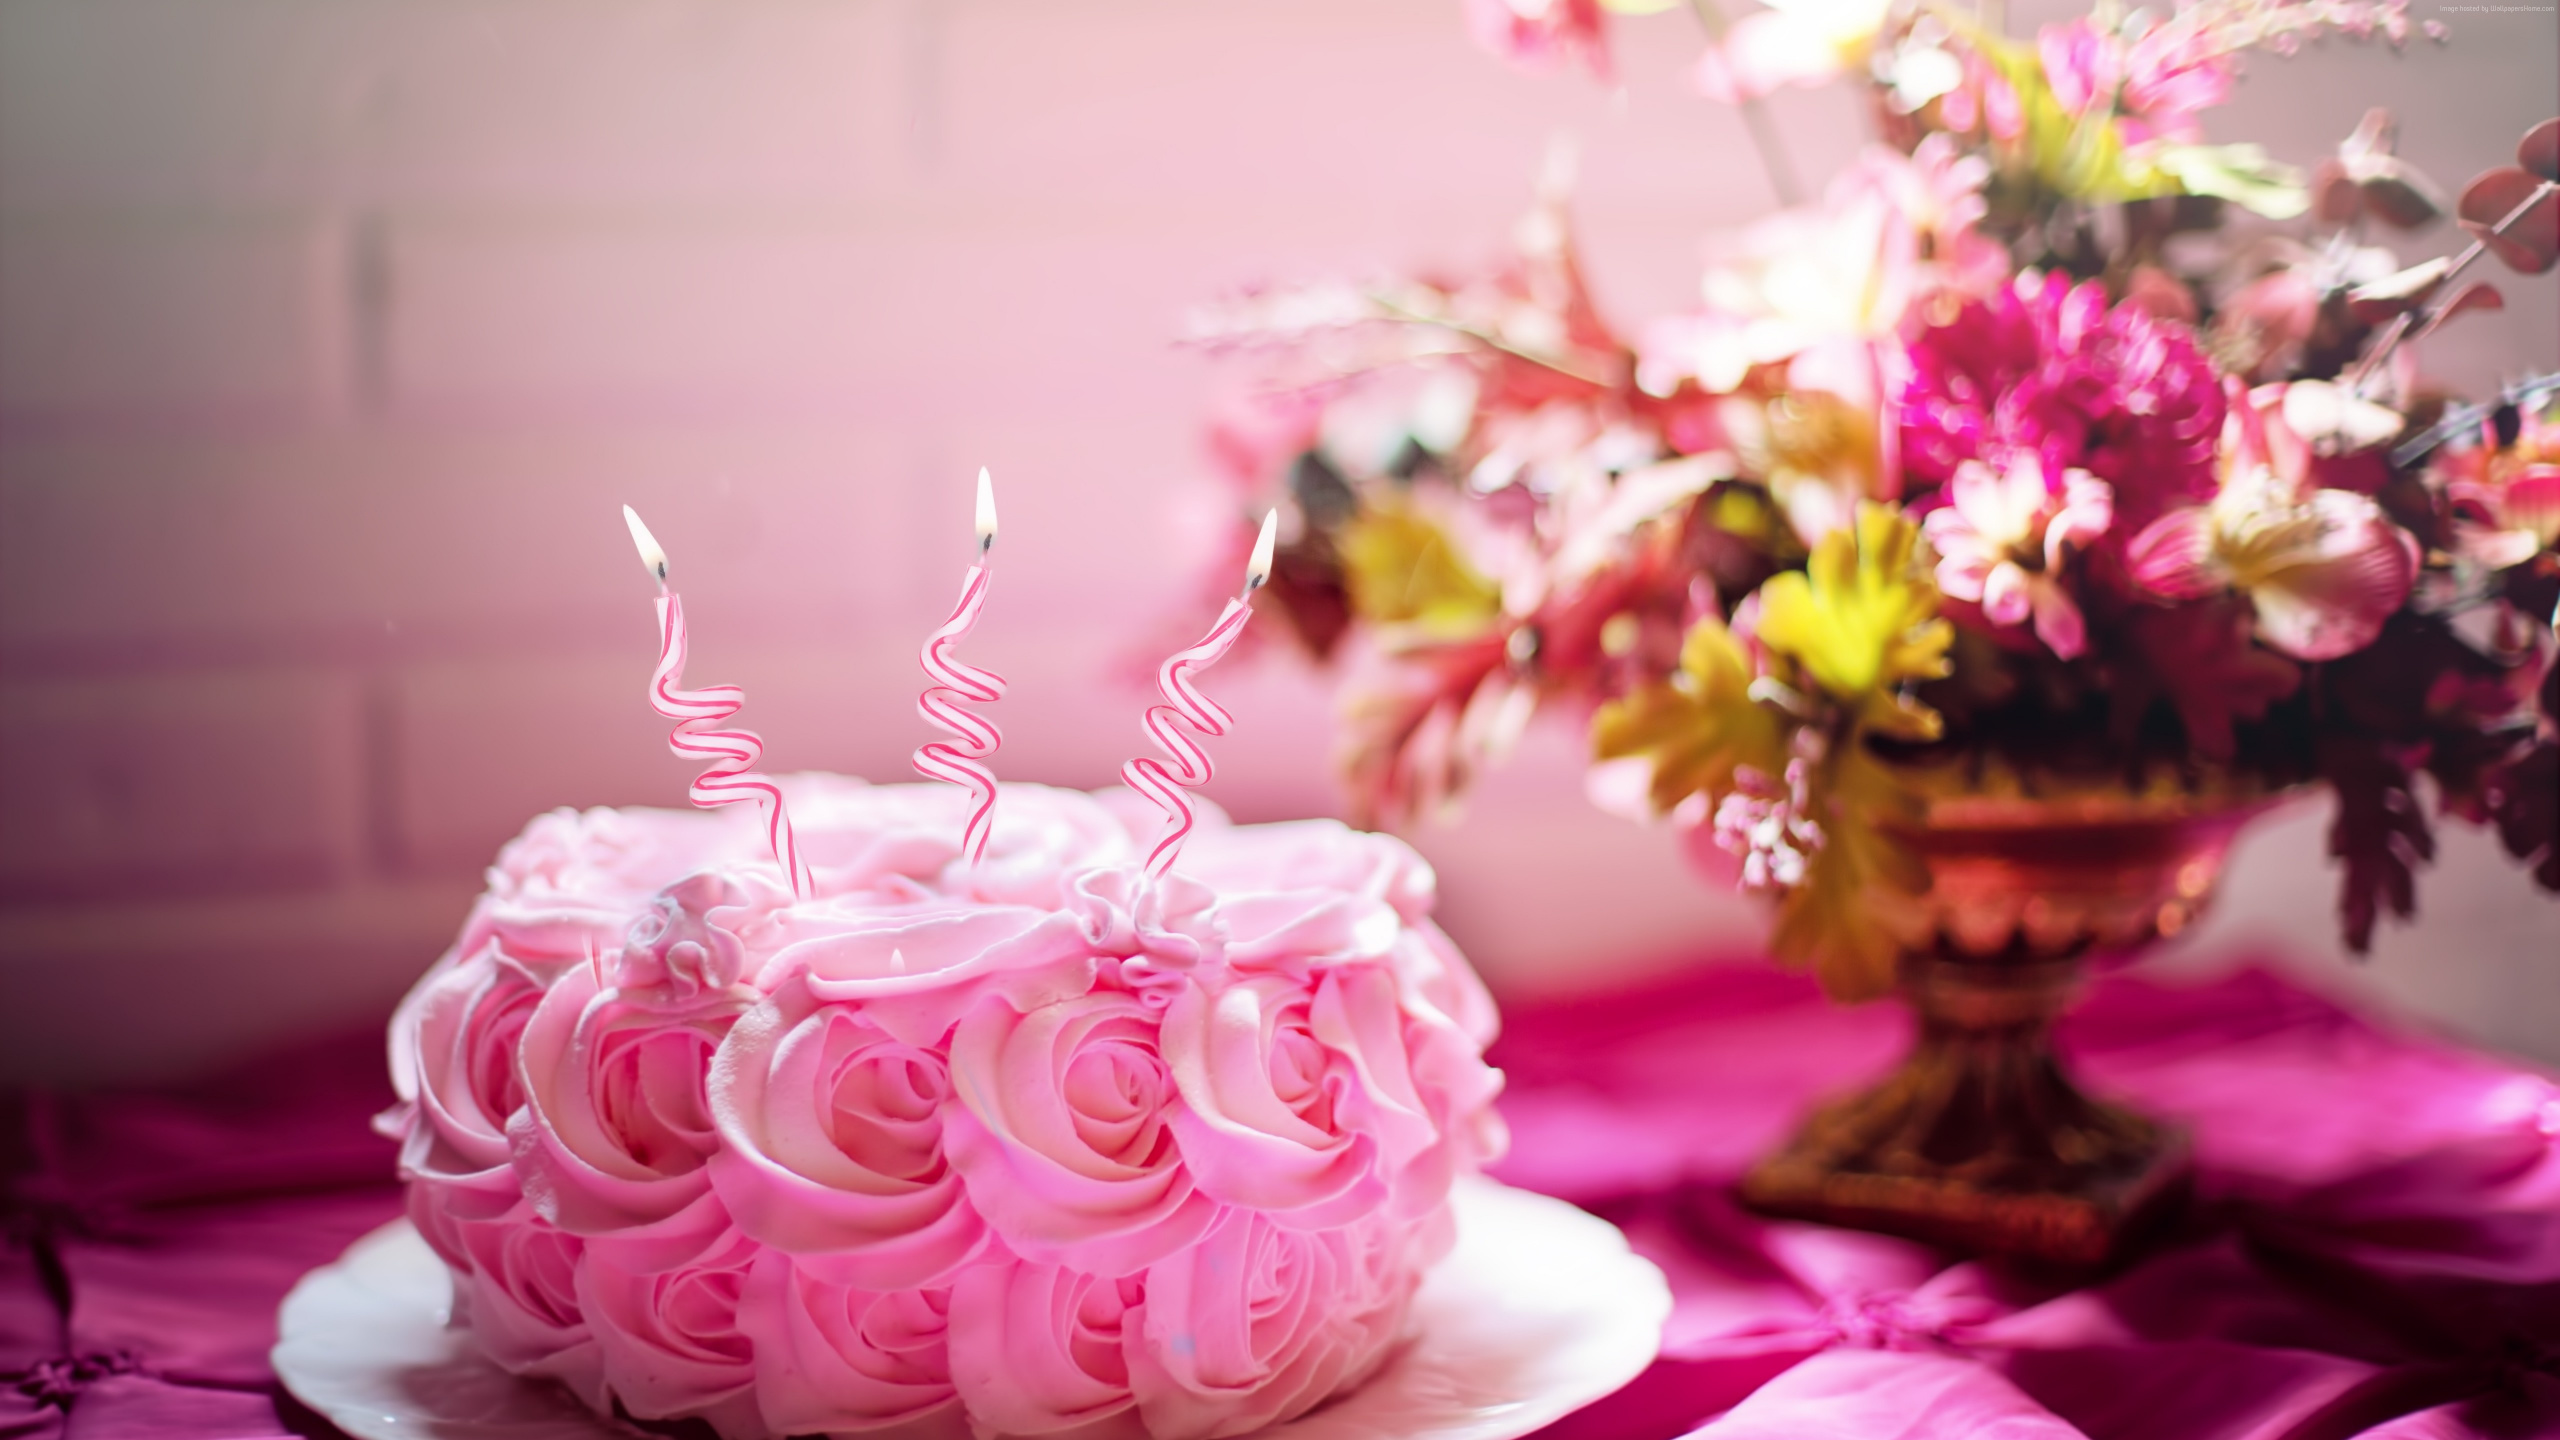 Icing, Birthday Cake, Cake Decorating, Pink, Sweetness. Wallpaper in 2560x1440 Resolution